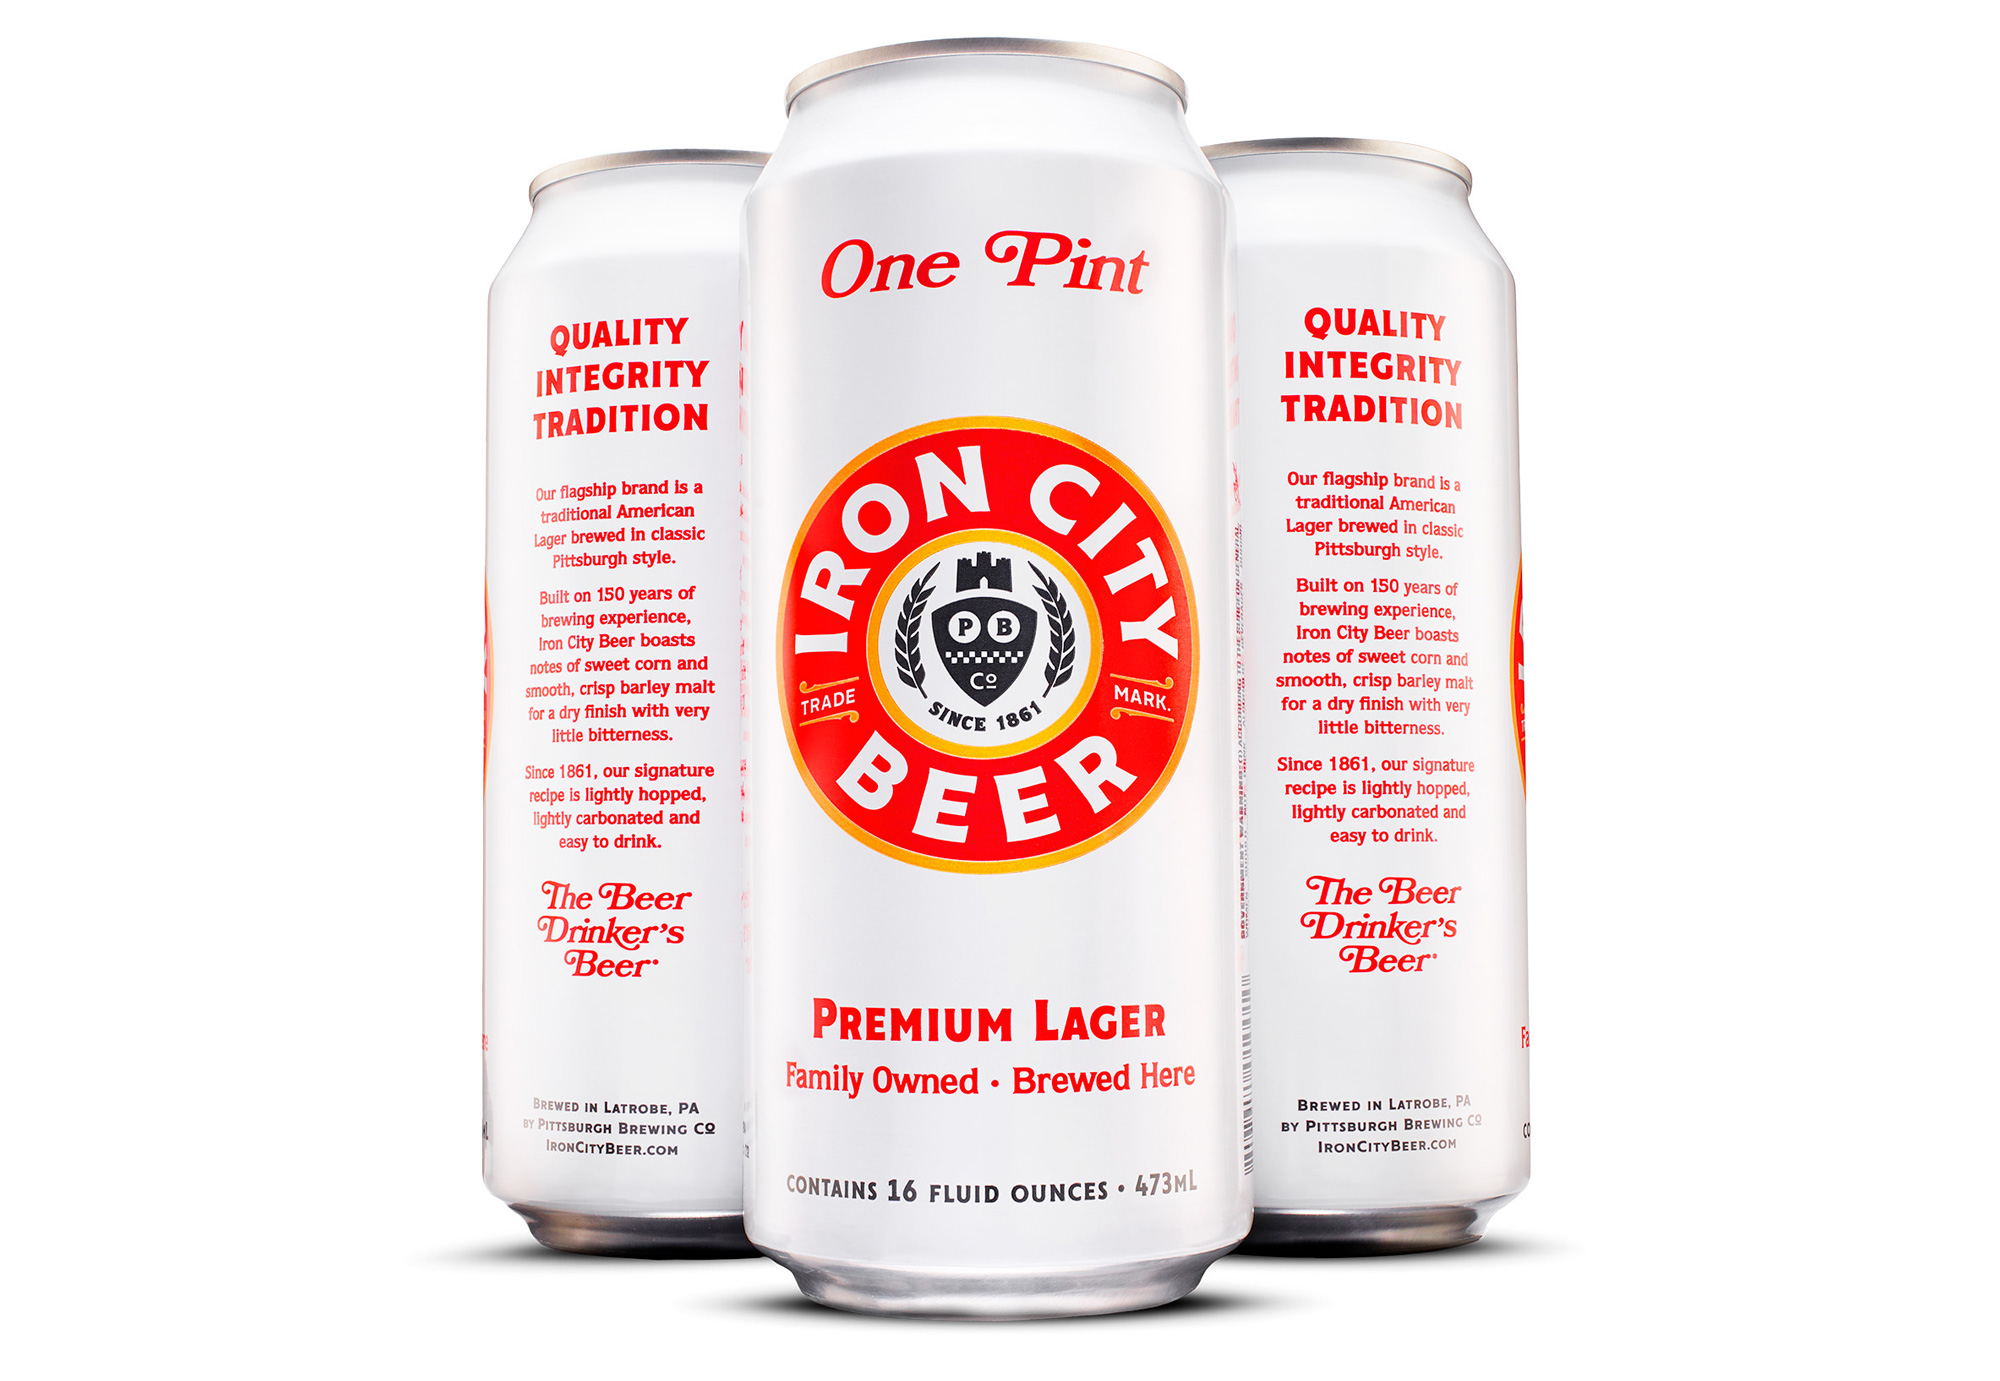 New Logo, Advertising, and Packaging for Iron City Beer by Top Hat